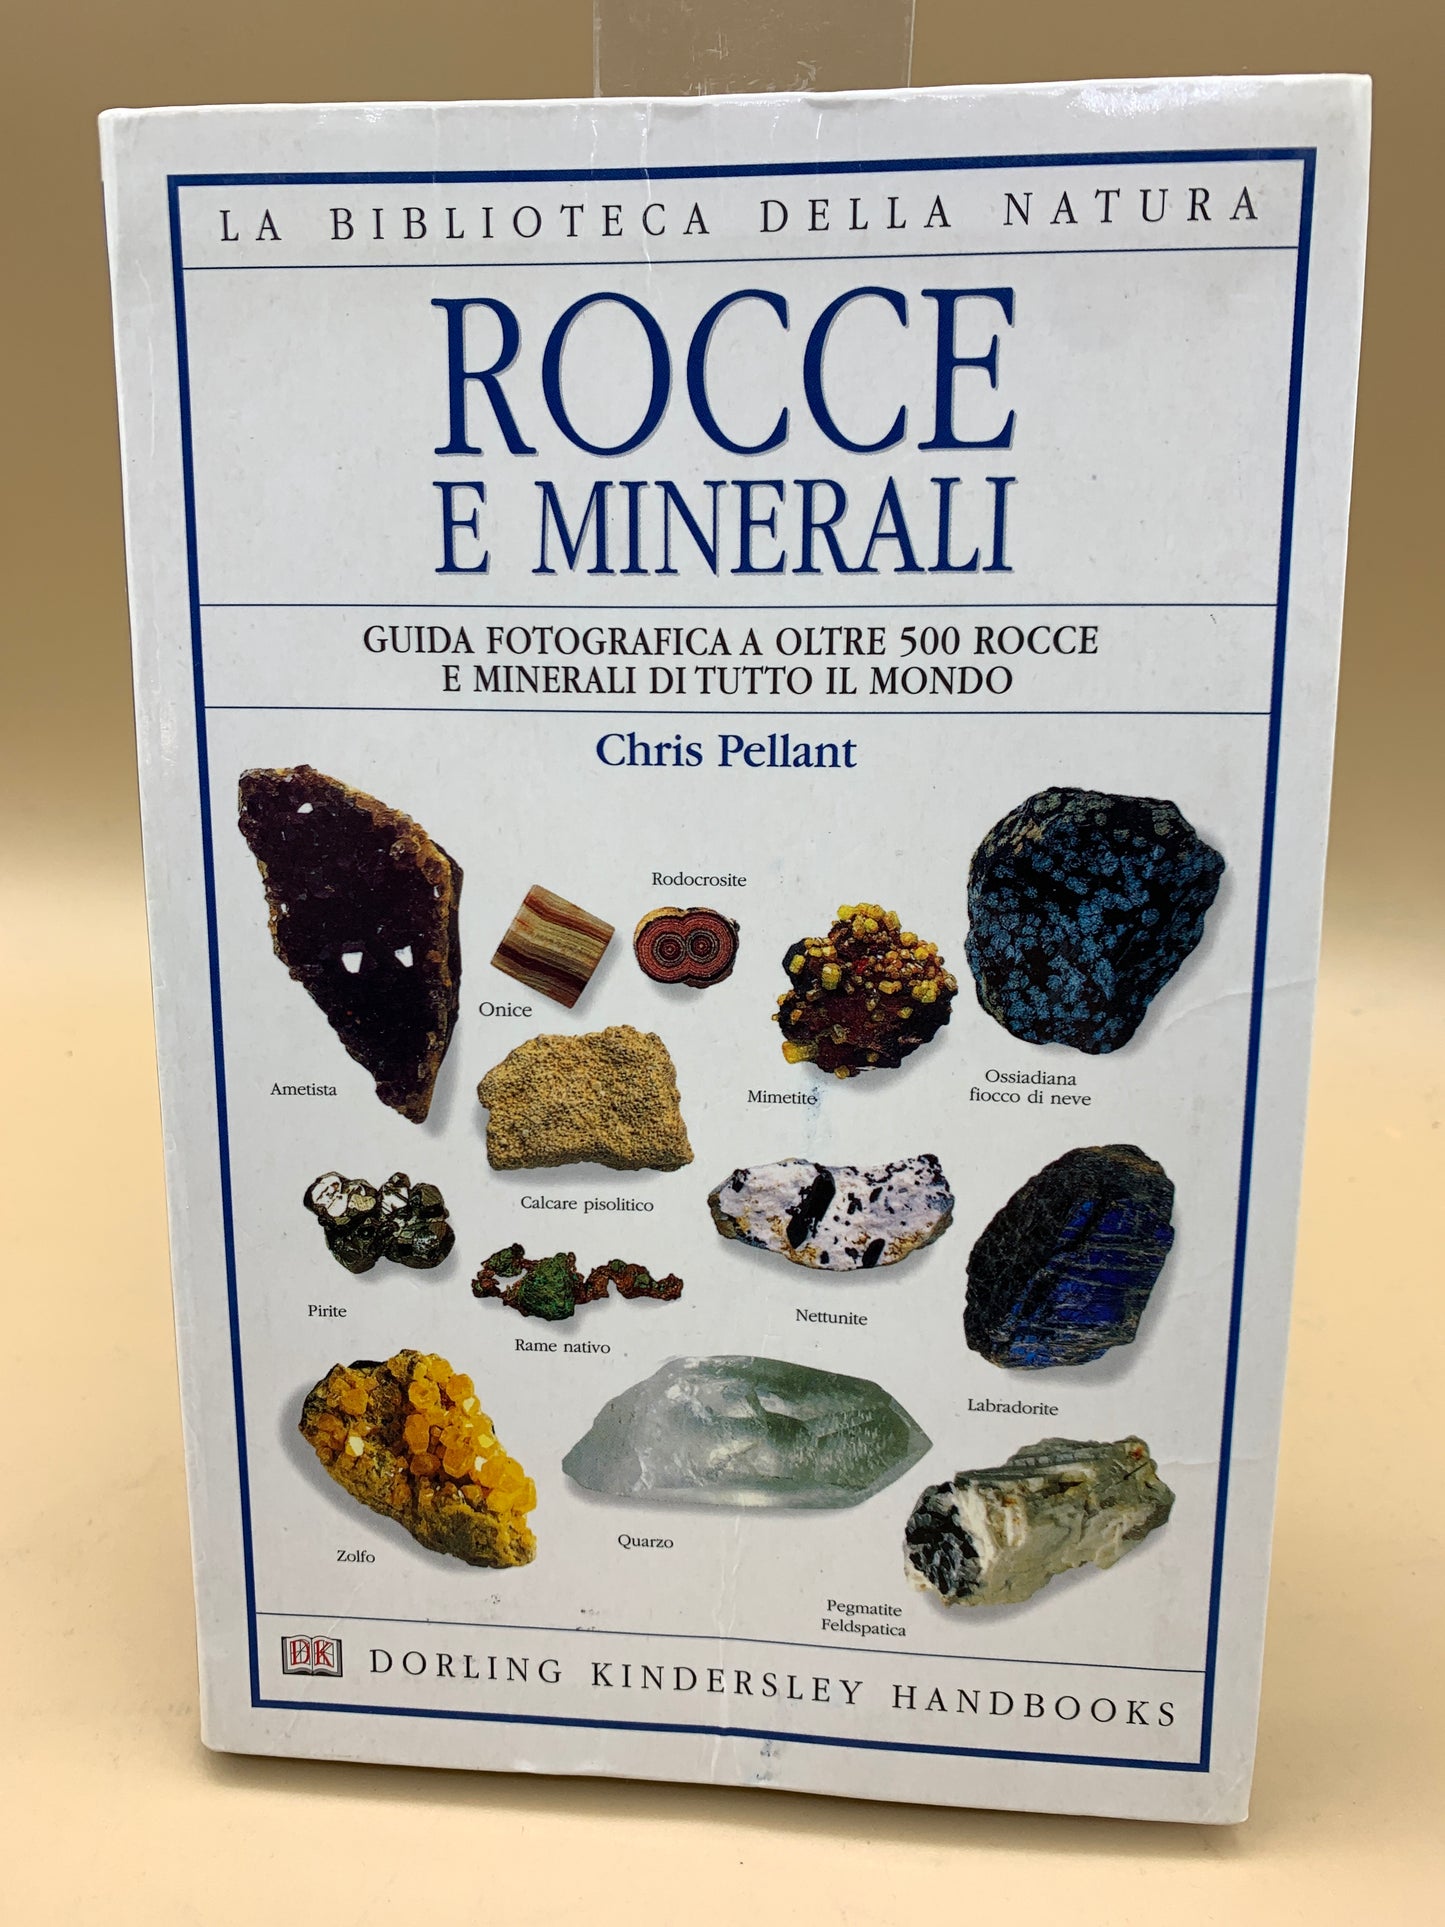 Rocks and Minerals - photo guide to over 500 rocks and minerals from around the world